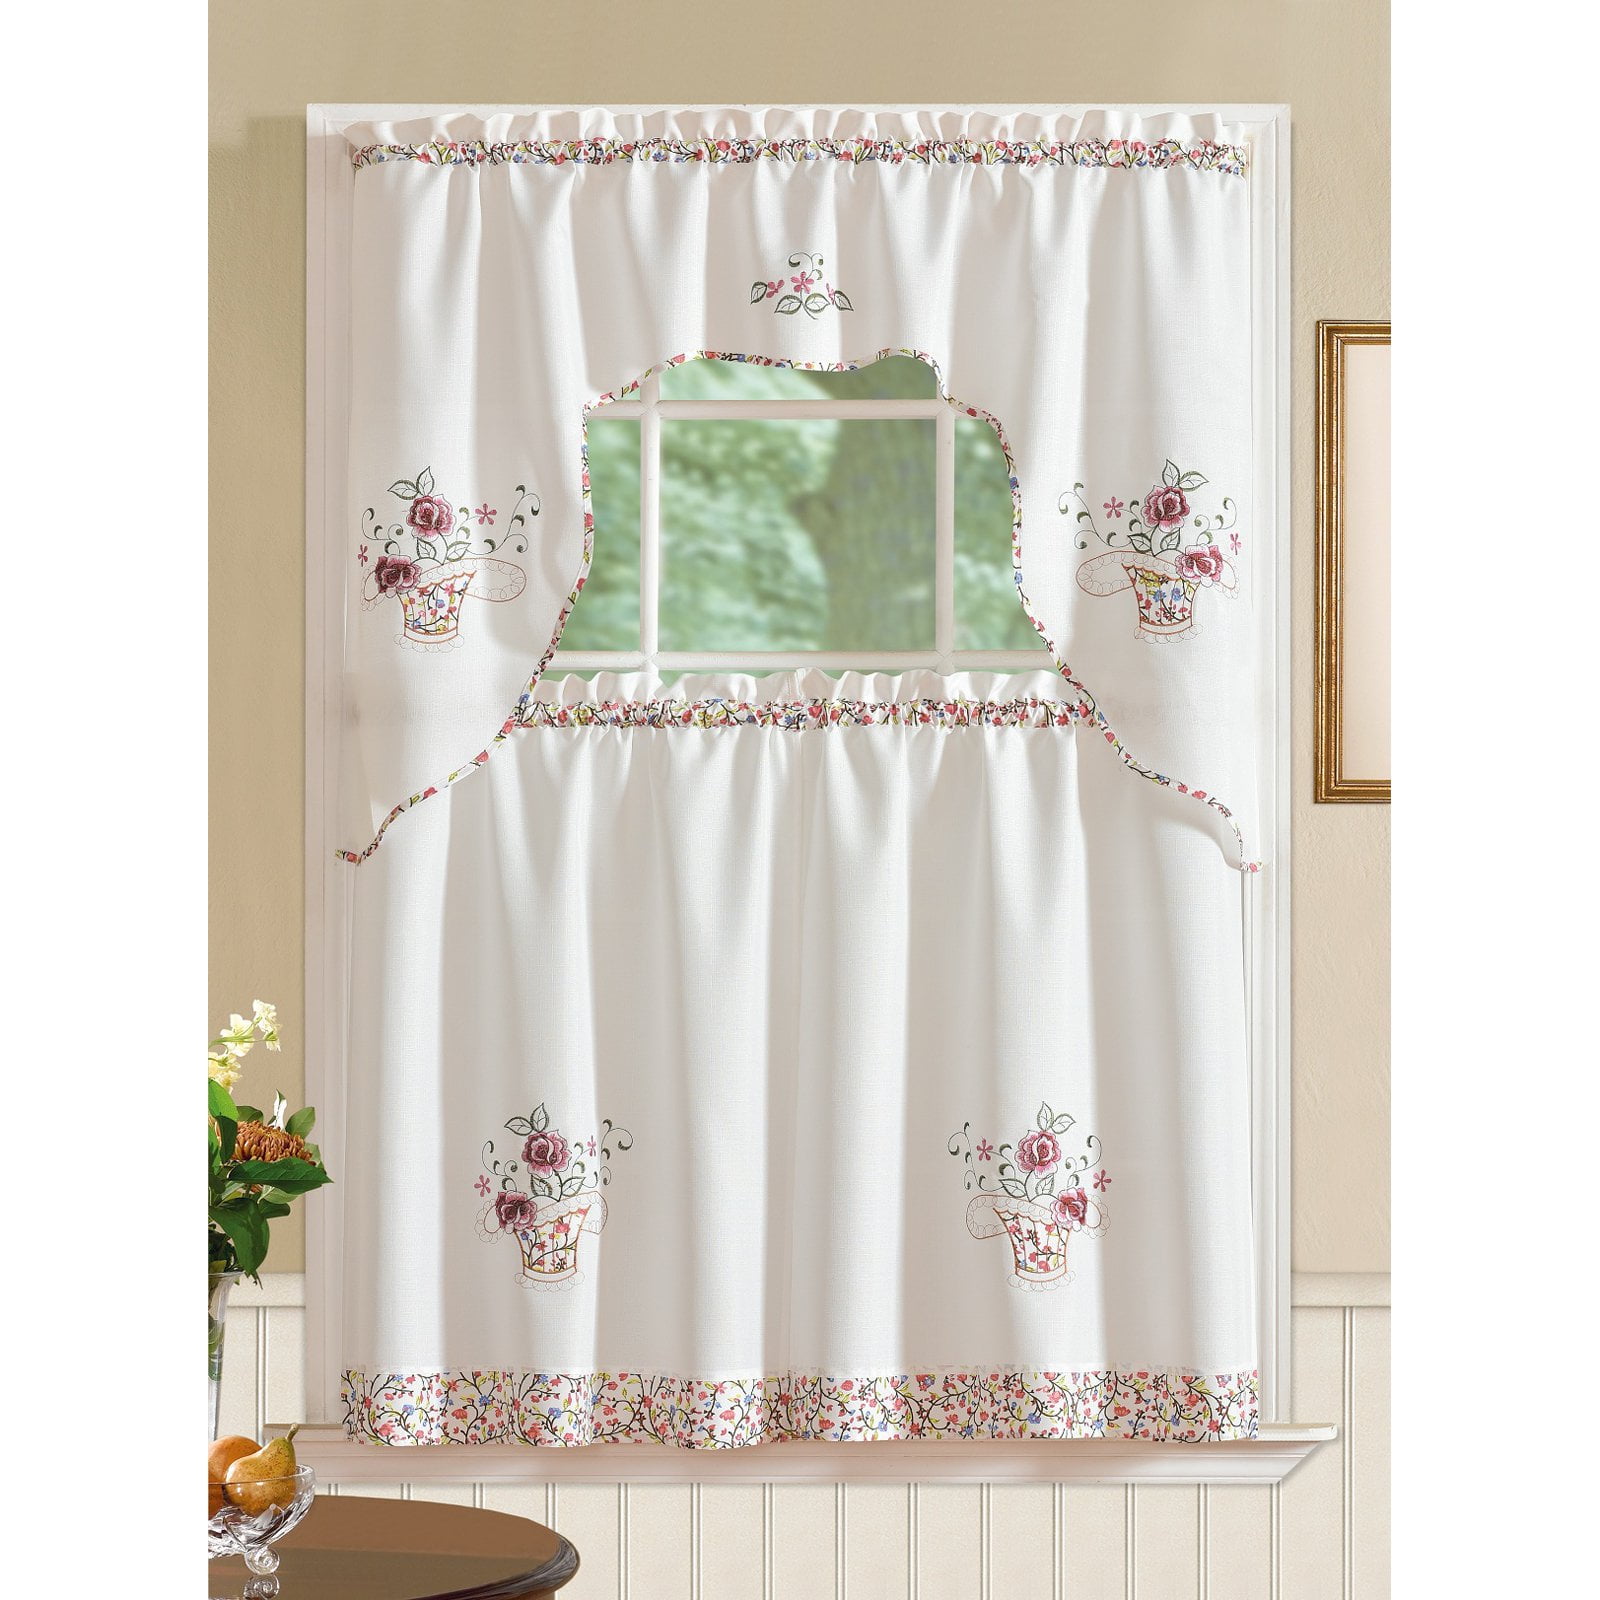 Grand Rose Embroidered Tier and Swag Kitchen Curtain Set - Walmart.com